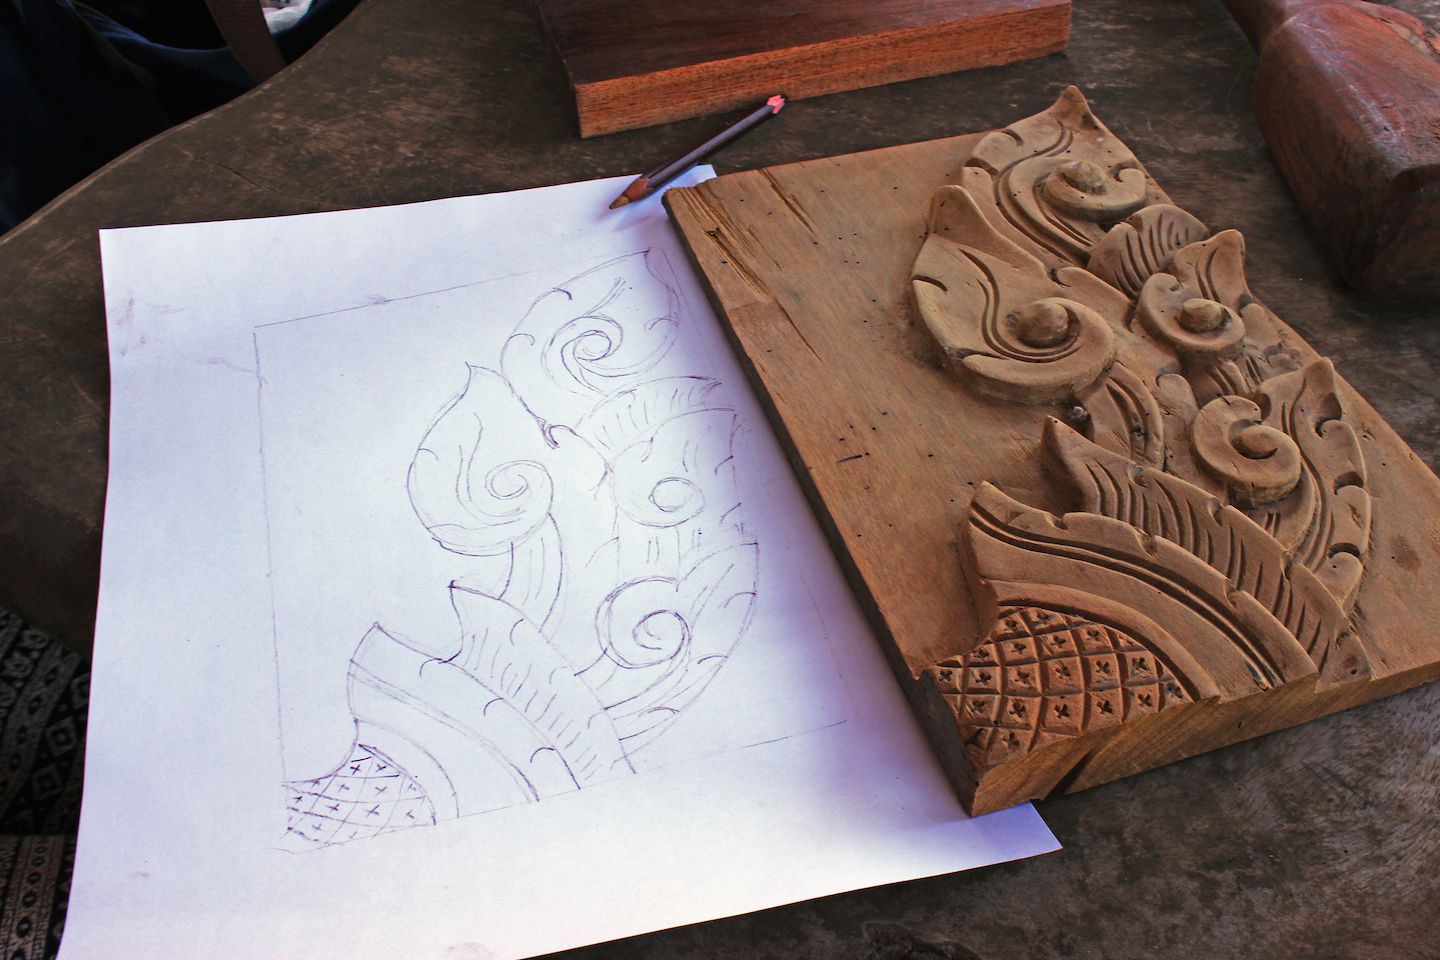 Drawing before carving, Vientiane, Laos